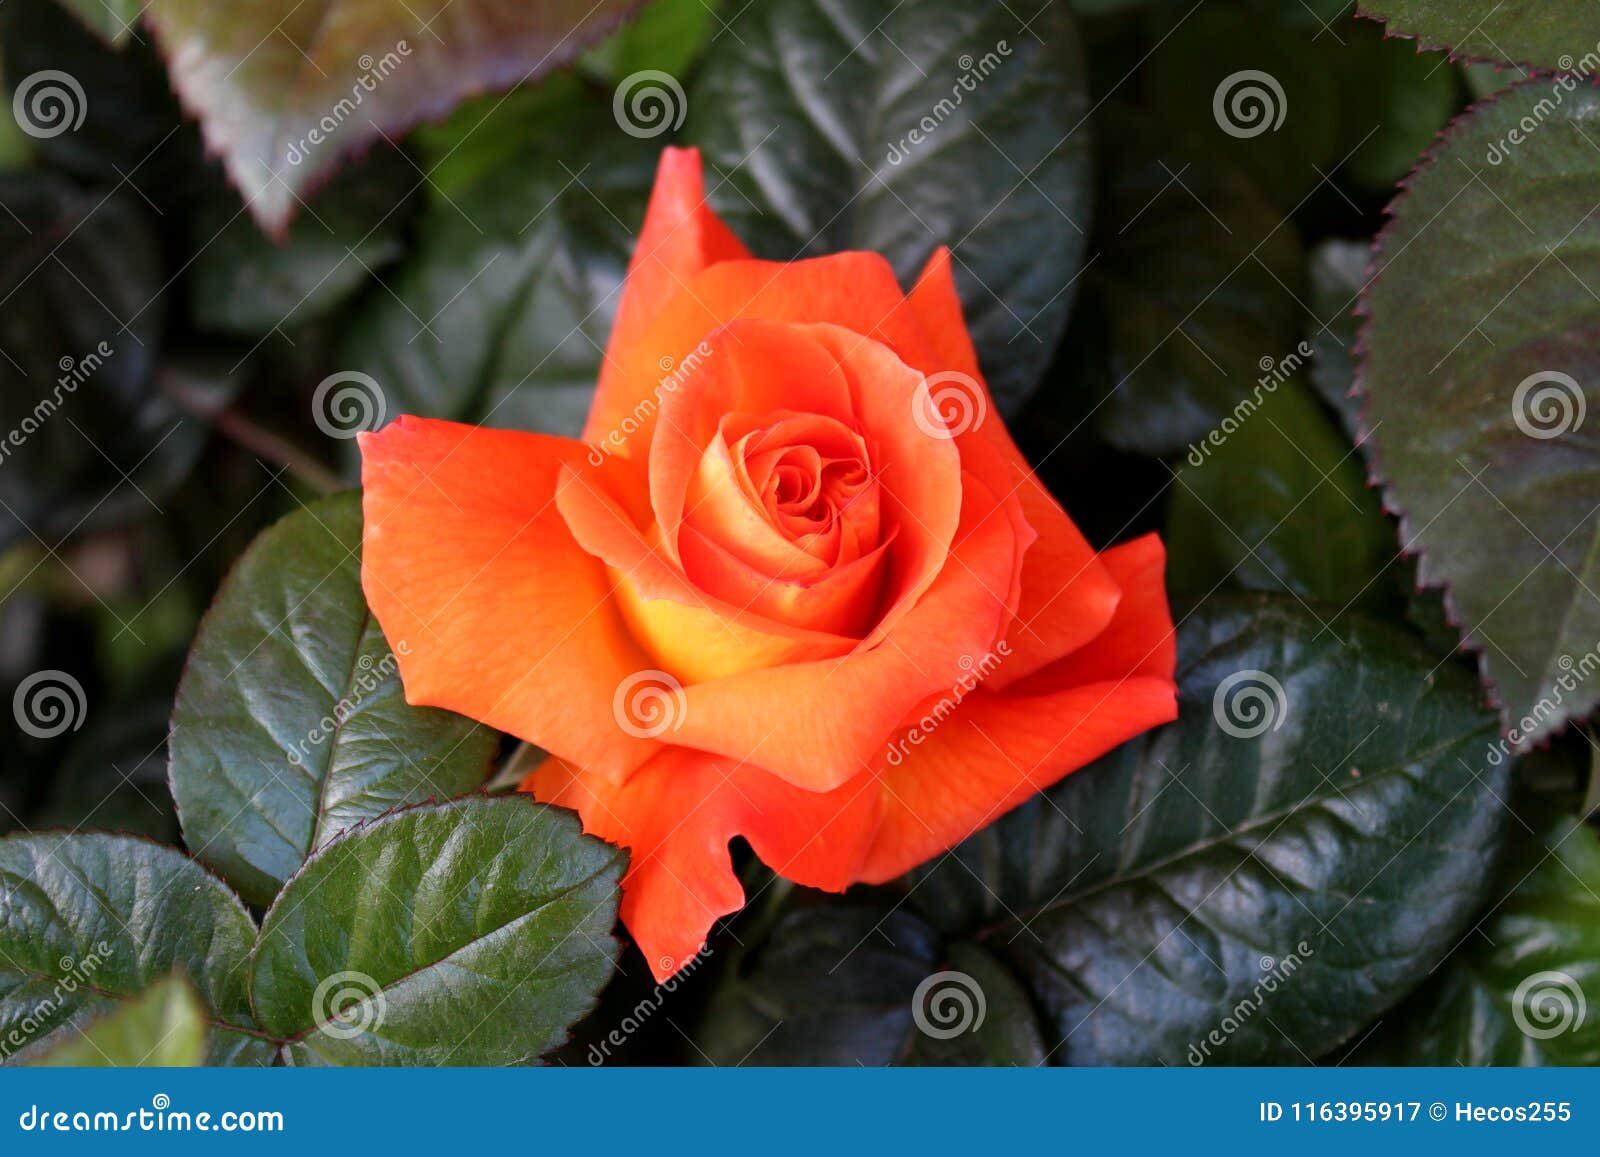 Orange Rose Blossom Surrounded with Dark Green Leaves Stock Image ...